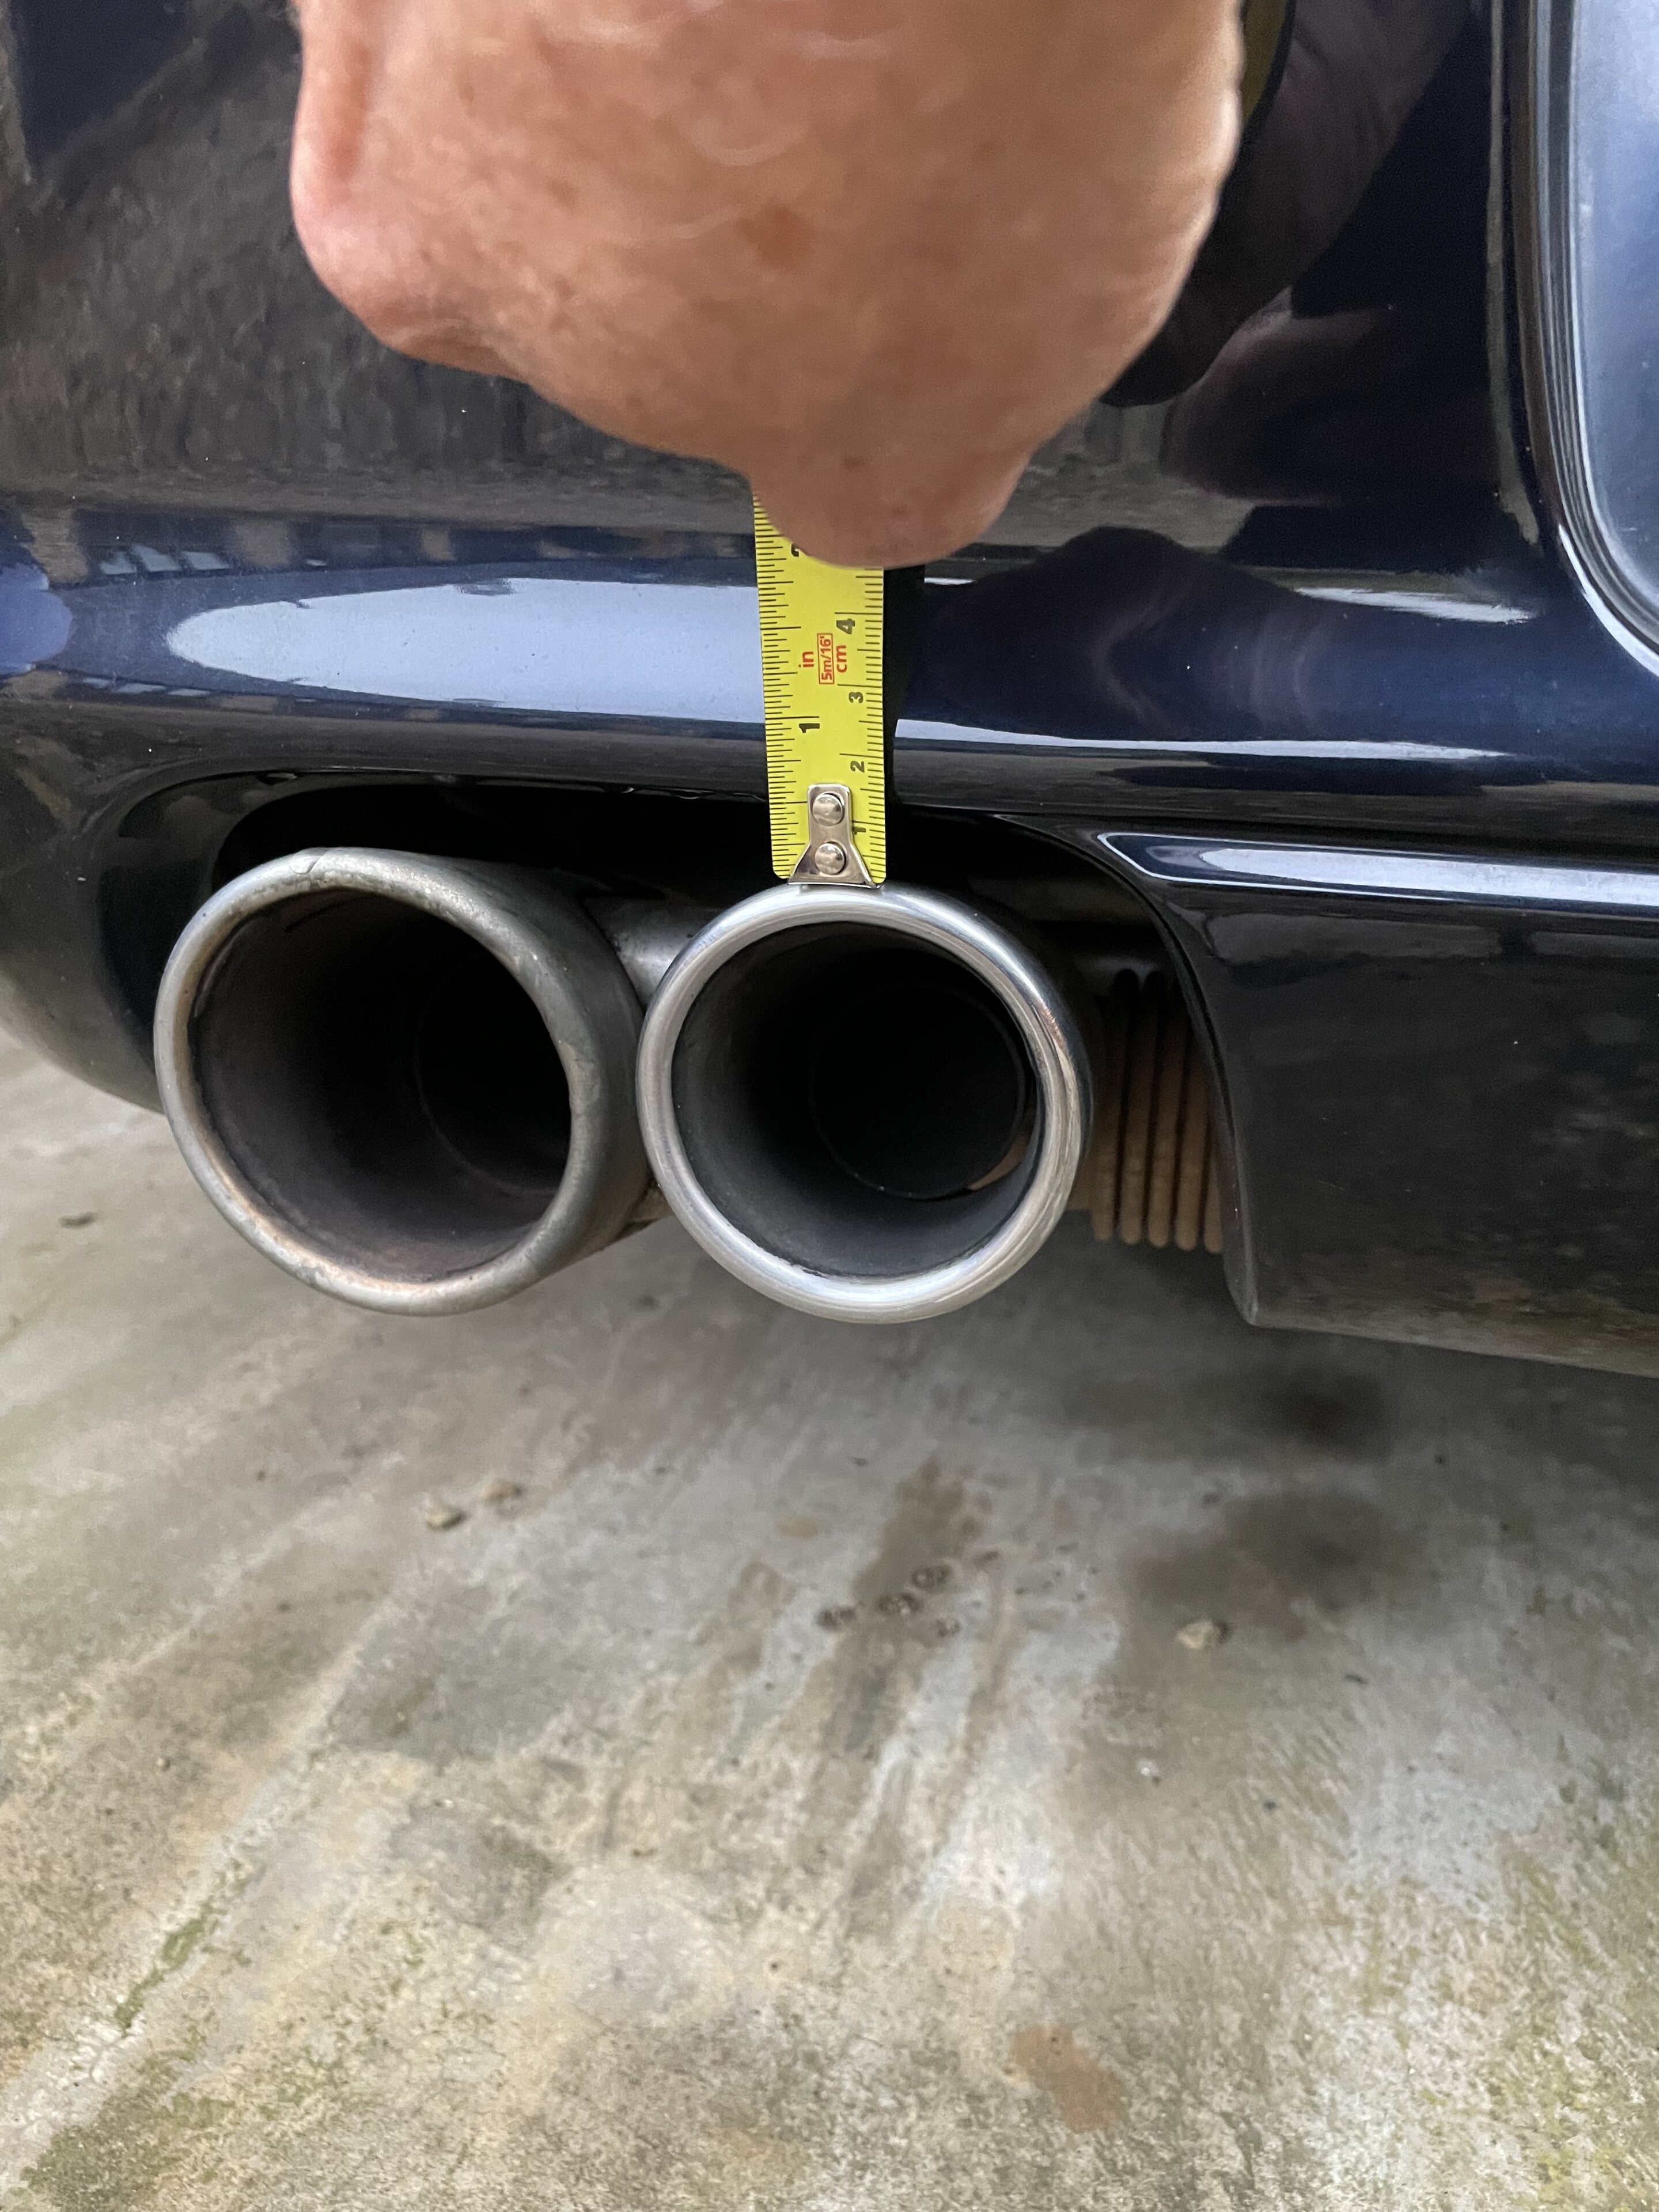 Pistonheads - The image shows a car with its exhaust pipes exposed, indicating it may be an older model or modified to expose the piping. A person's hand is visible in the bottom right corner of the photo, holding a measuring tape against one of the pipe holes. This suggests that someone might be checking the size or condition of these pipes. The car appears to have two exhaust pipes, both prominently featured in the image. There are no texts or distinctive brands visible in the image. The background is indistinct and does not provide additional context about the location or event.